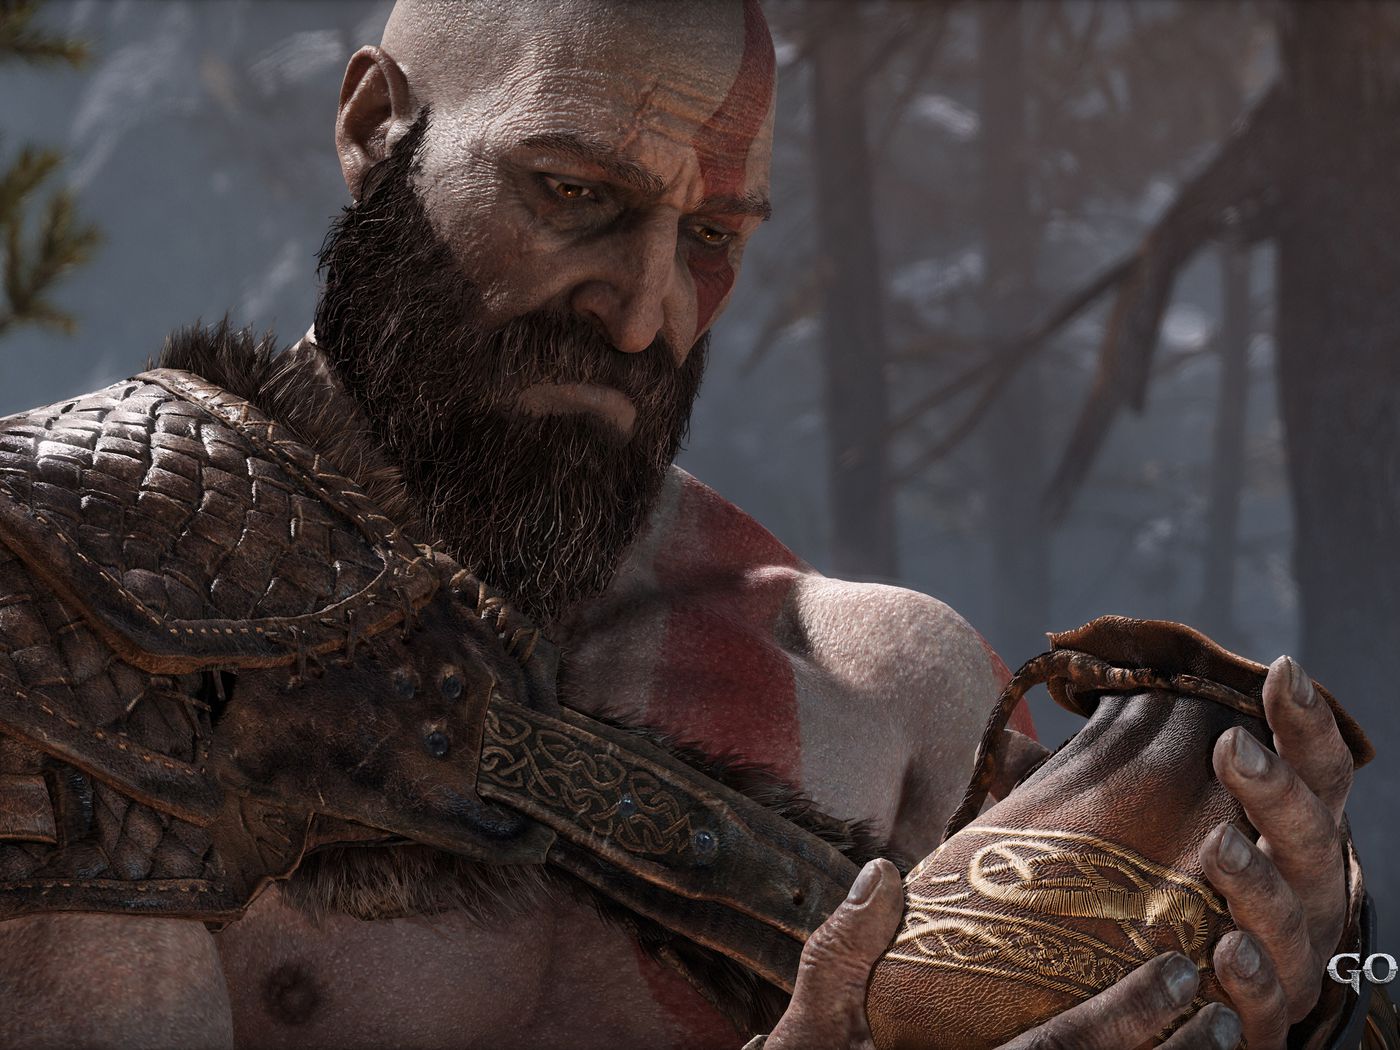 God of War PC system specifications will require an RTX 3080 for ultra